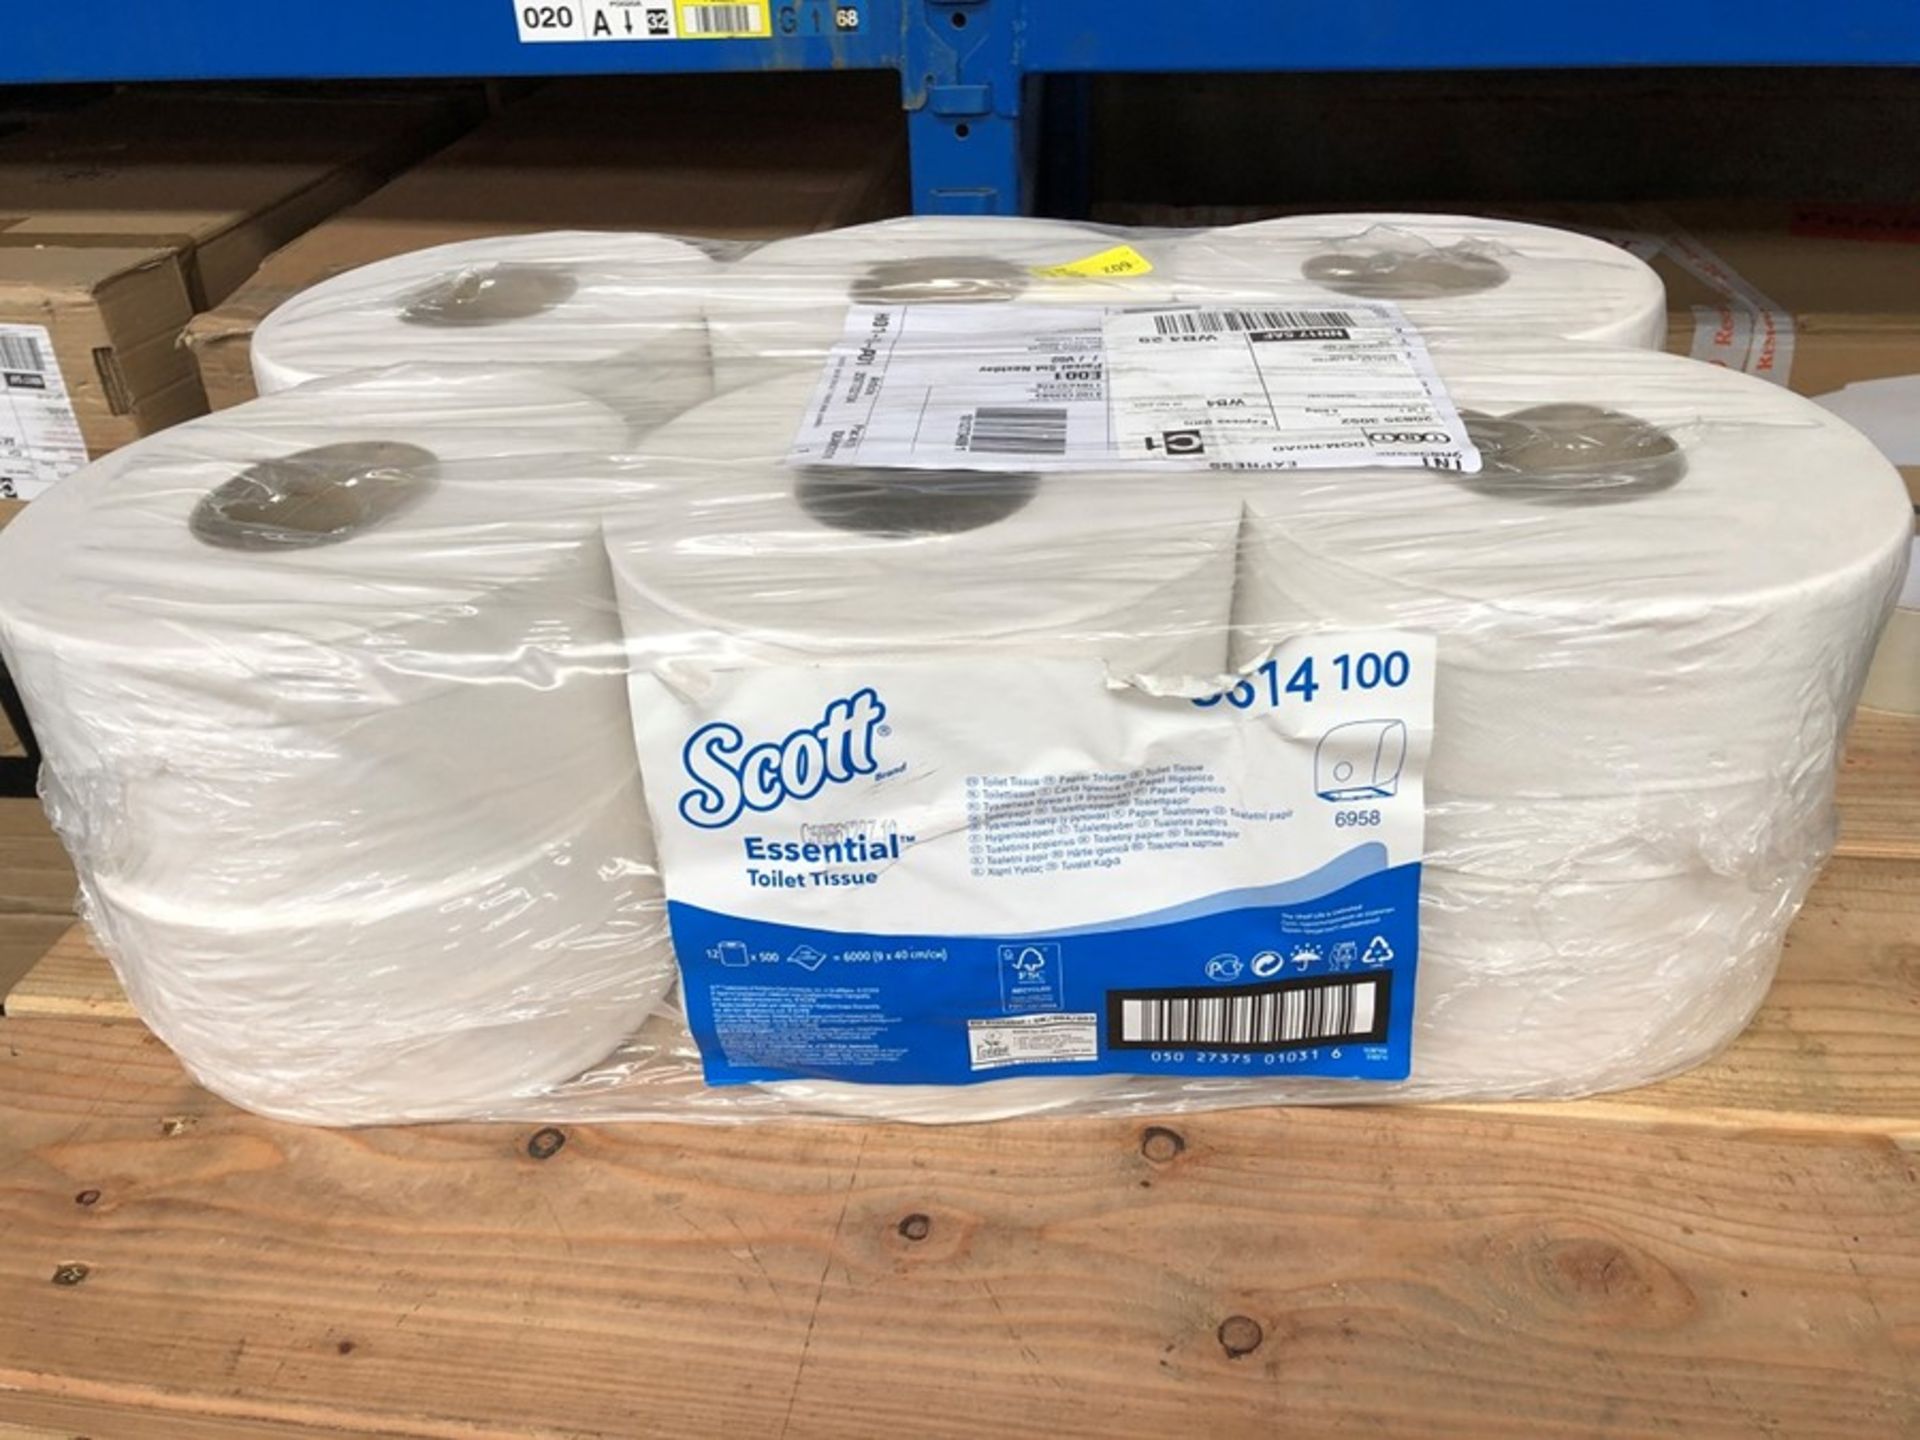 1 PACK CONTAINING 12 ROLLS OF SCOTT ESSENTIAL TOILET TISSUE / 12 X 500 SHEETS